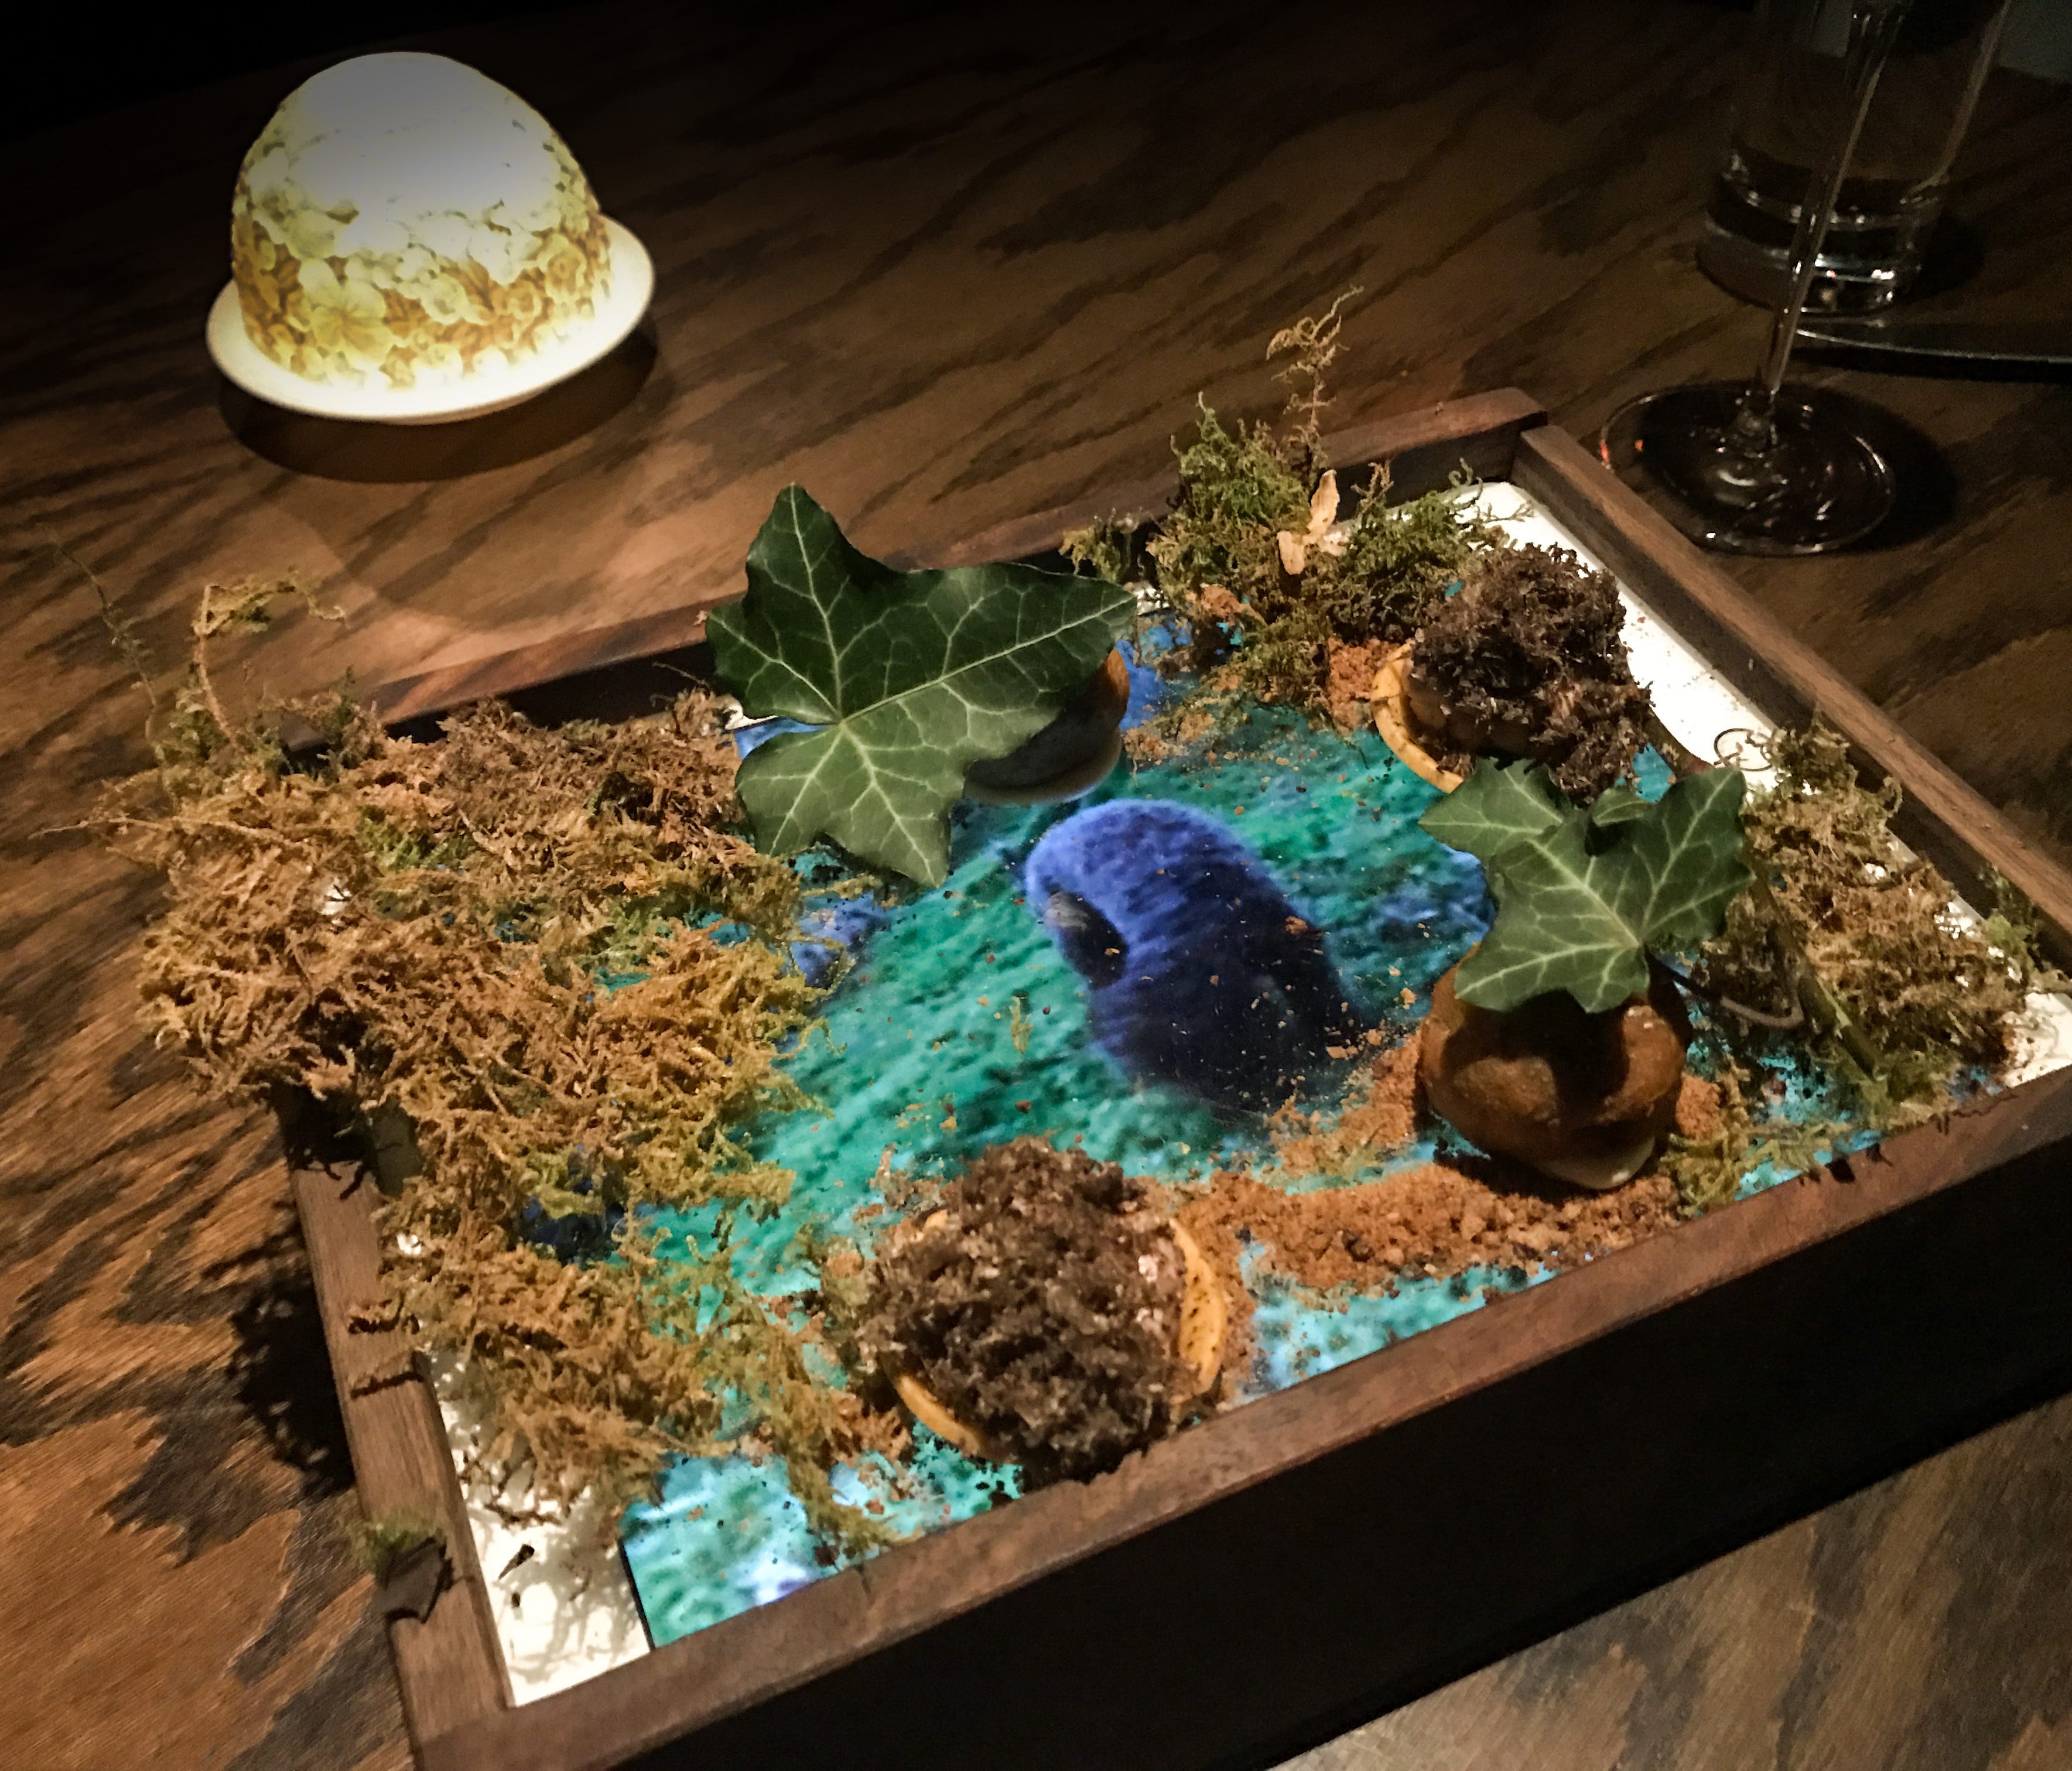 At Quince in San Francisco, chef Michael Tusk serves a truffle mushroom dish on a sheath-covered iPad, called A Dog Searching for Gold, that celebrates truffle season. The iPad plays a video of a truffle dog hunting for truffles in Italy.